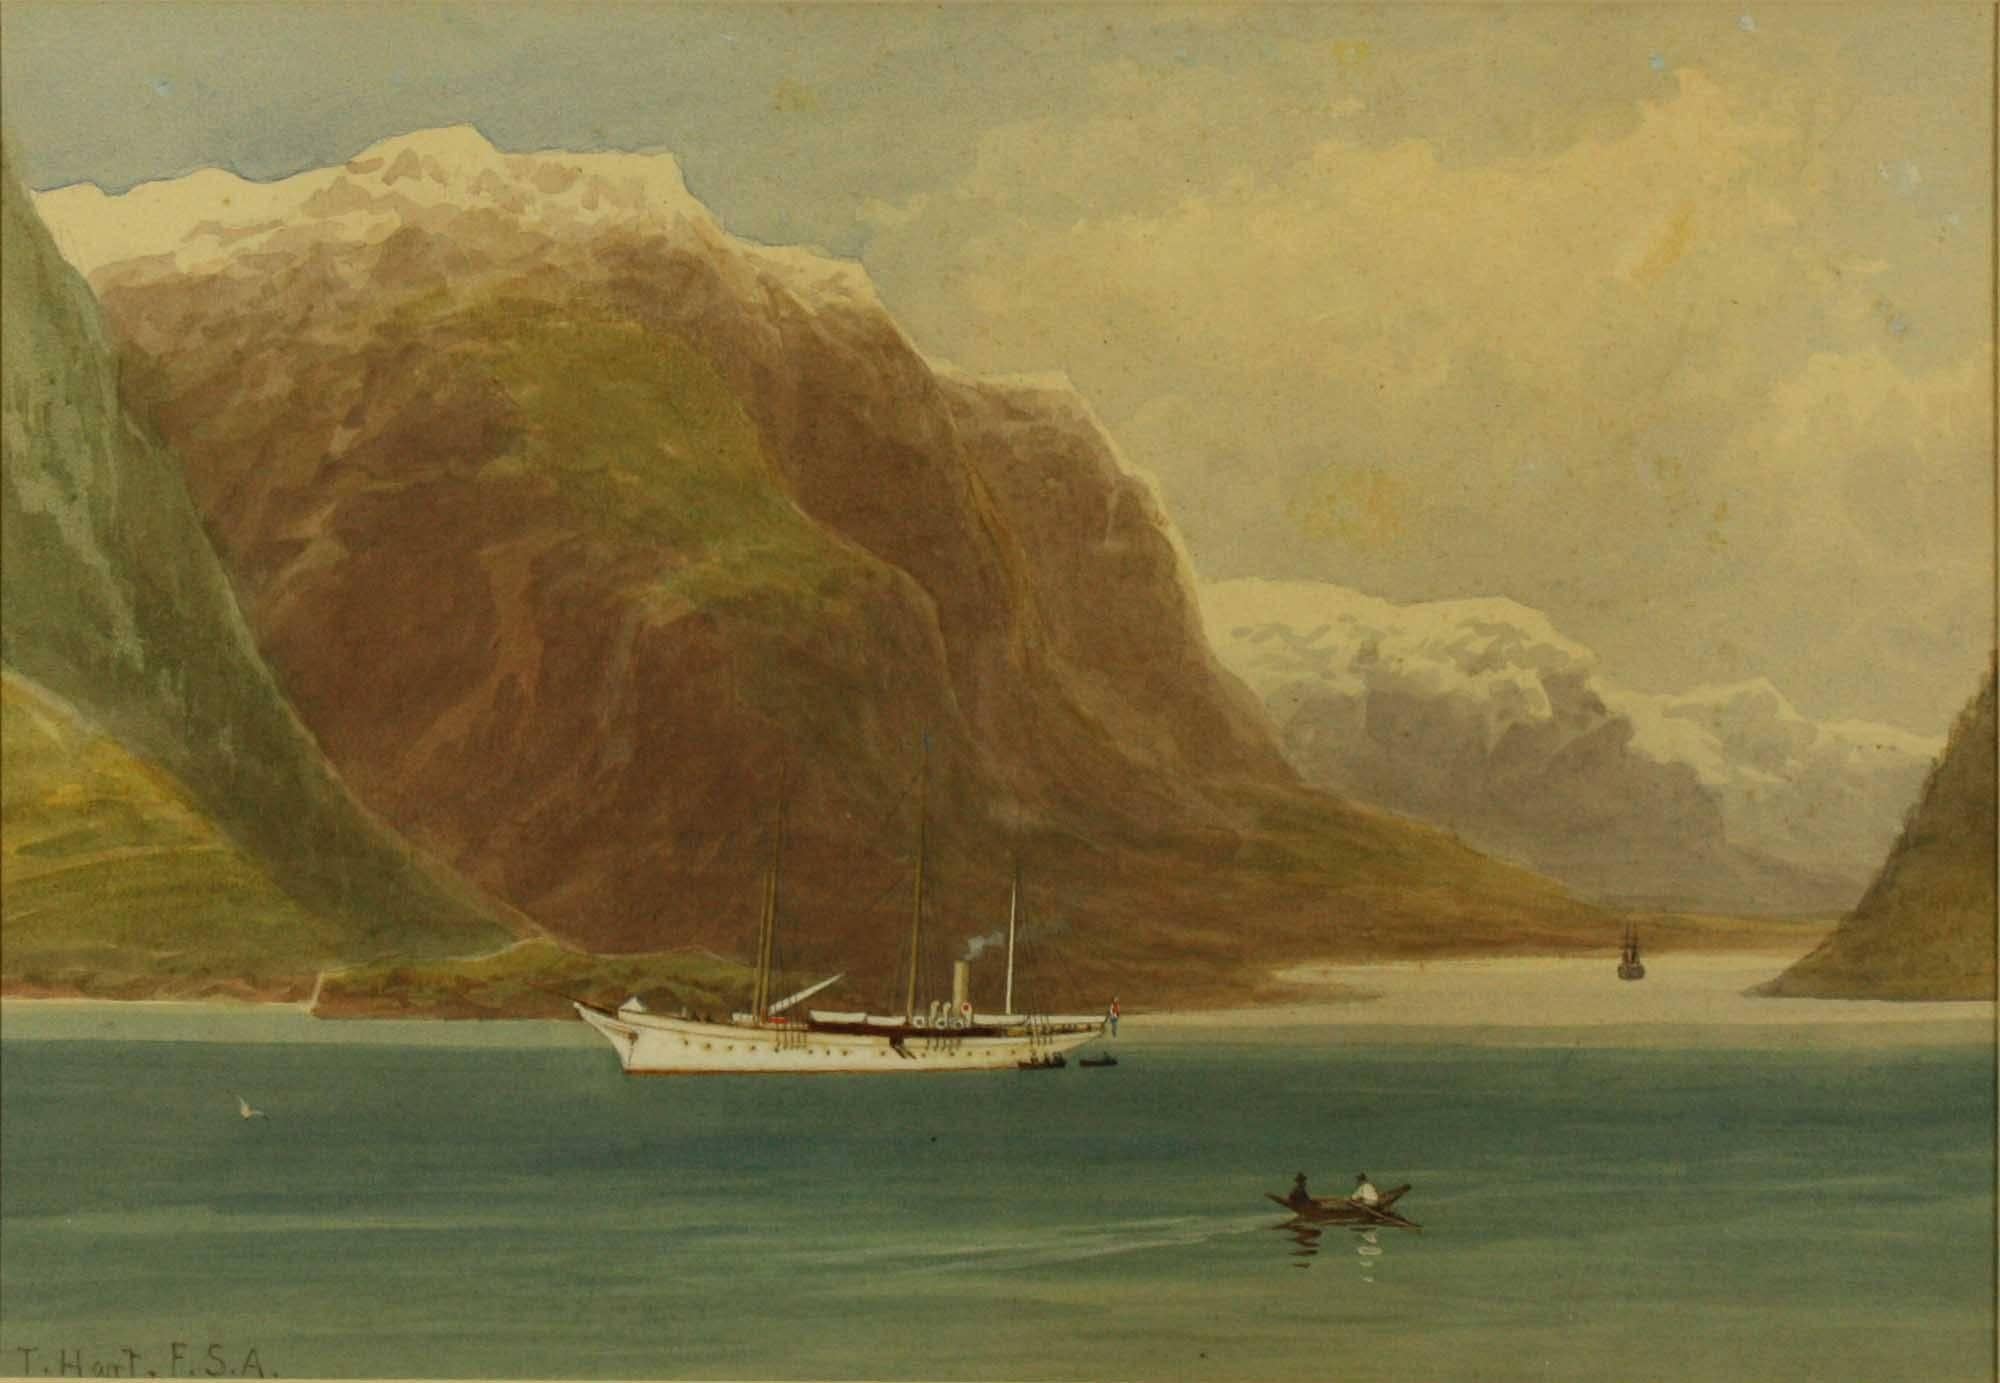 The White Ladye at Odda Norway by Thomas Hart
Watercolour on Paper
White Ladye was a steam yacht owned by the actress Lillie Langtry, built in 1891 by Ramage & Ferguson of Leith from a design by W C Storey; 3 masts; length 204 ft; breadth 27 ft; 142